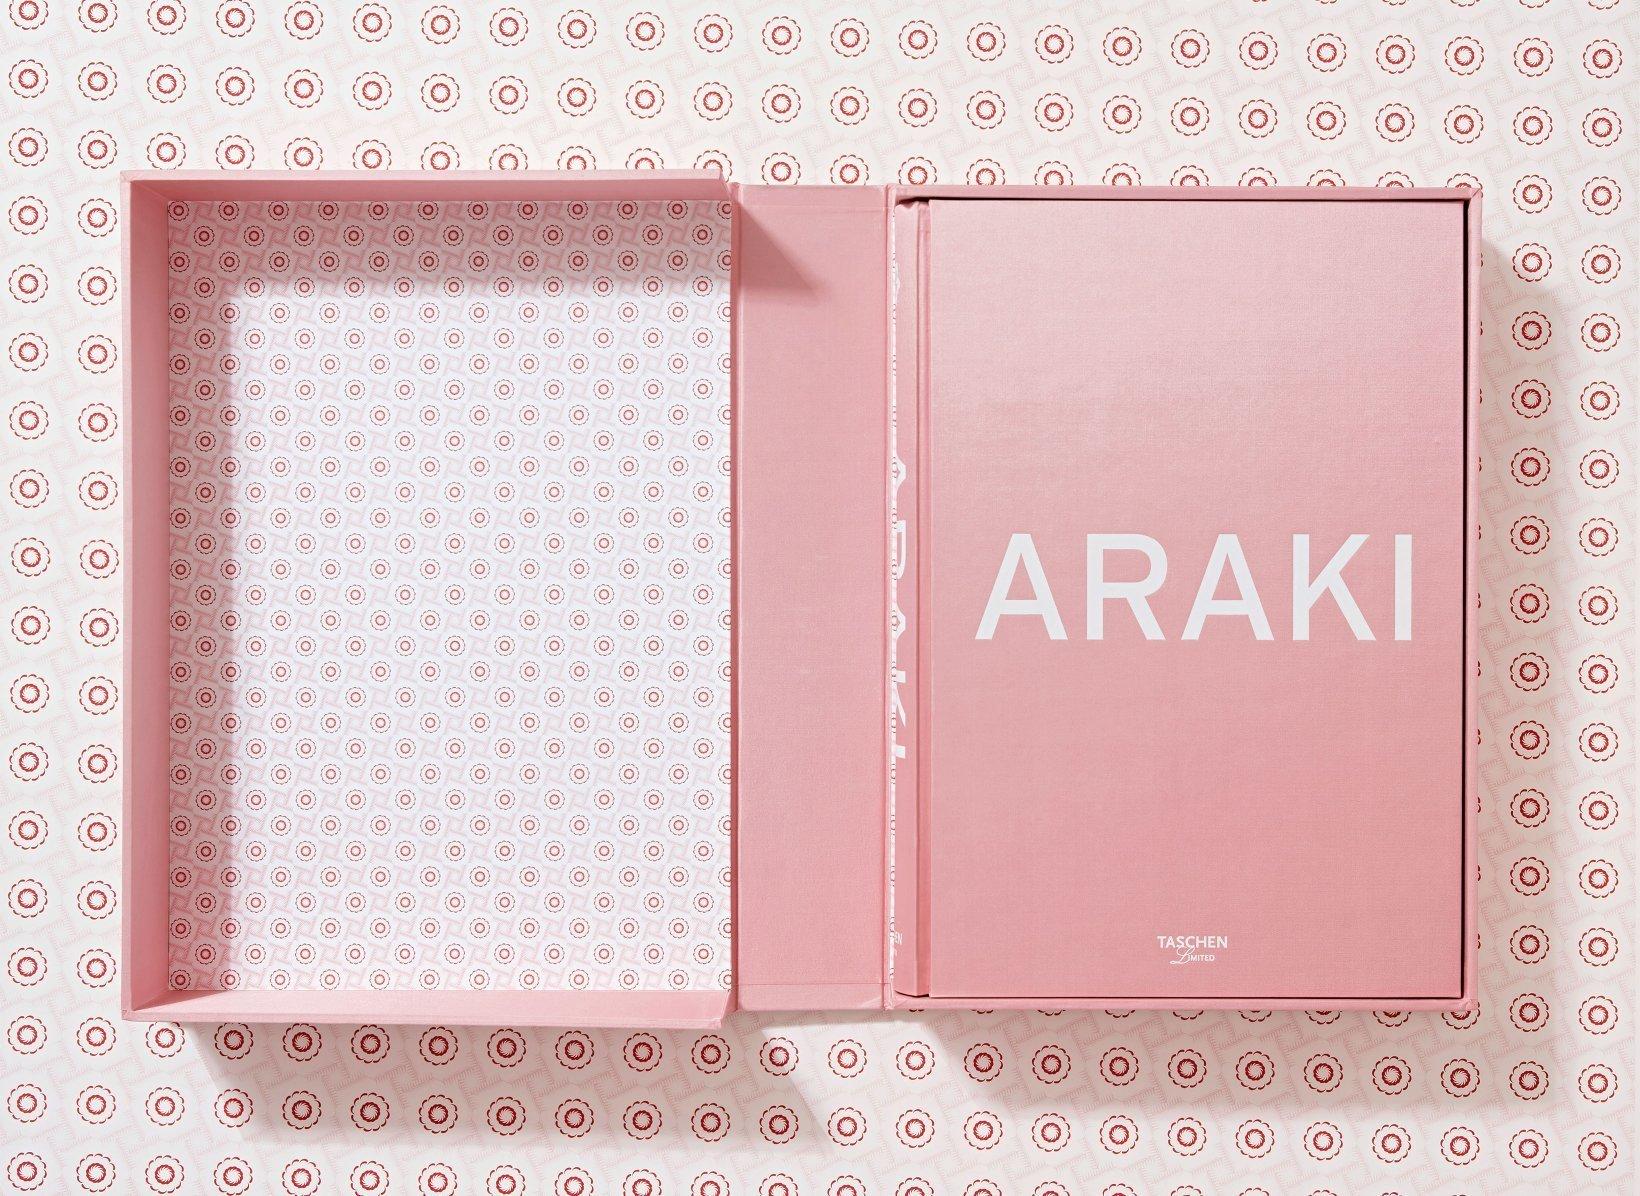 “This book reveals everything about me. It’s been a 60-year contract. Photography is love and death—that’ll be my epitaph.”
—Araki

The first title in our new TASCHEN limited series is Araki, an enormous and unique book with a print run of only